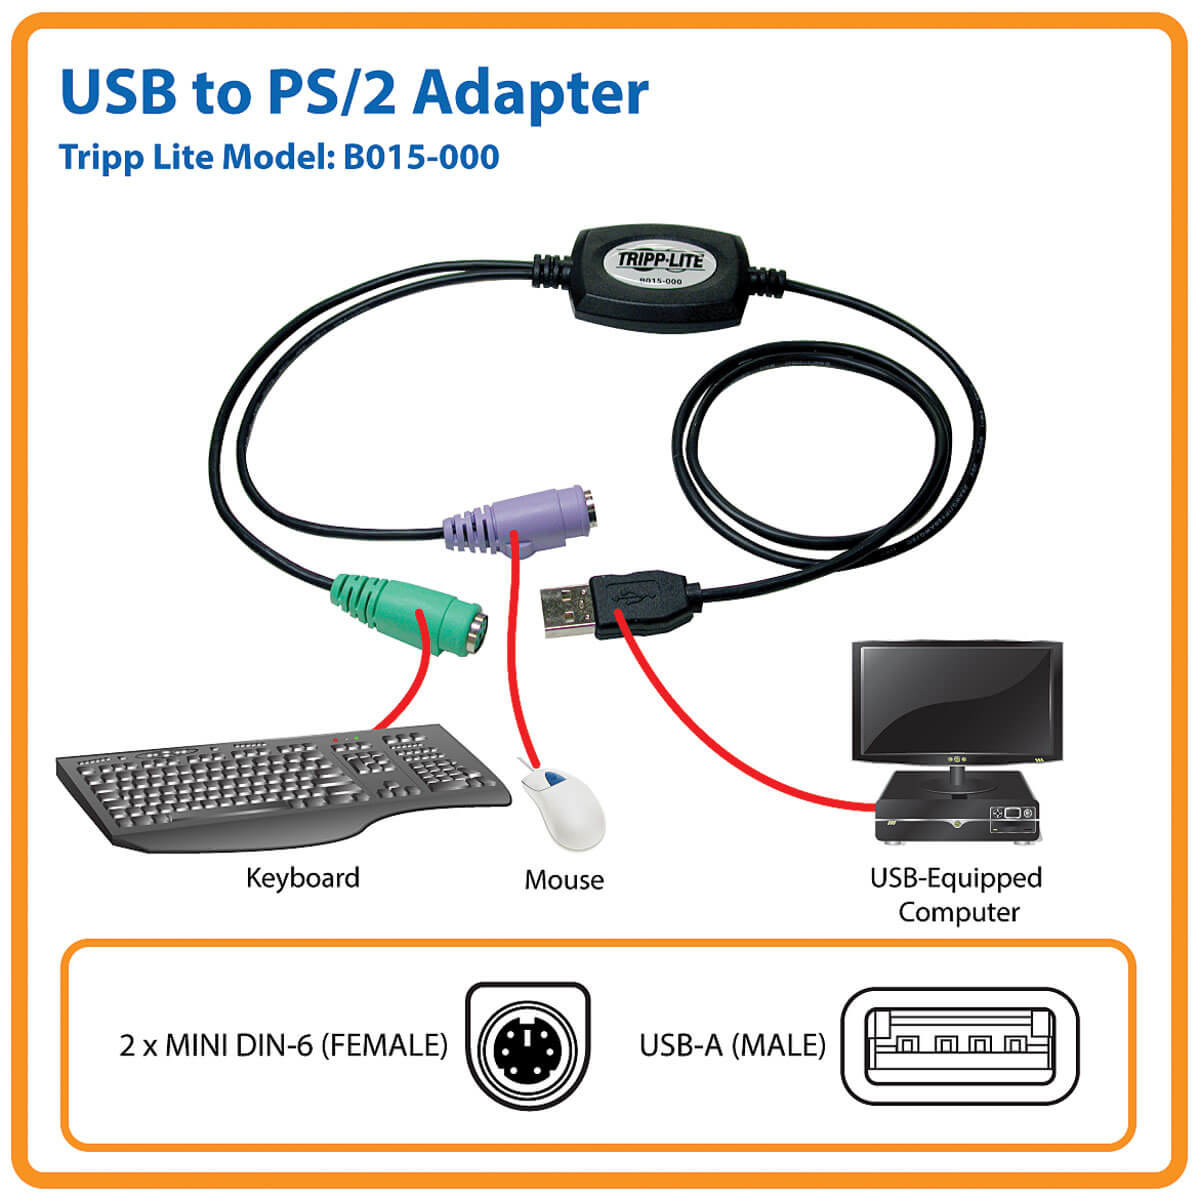 USB to PS/2 Adapter